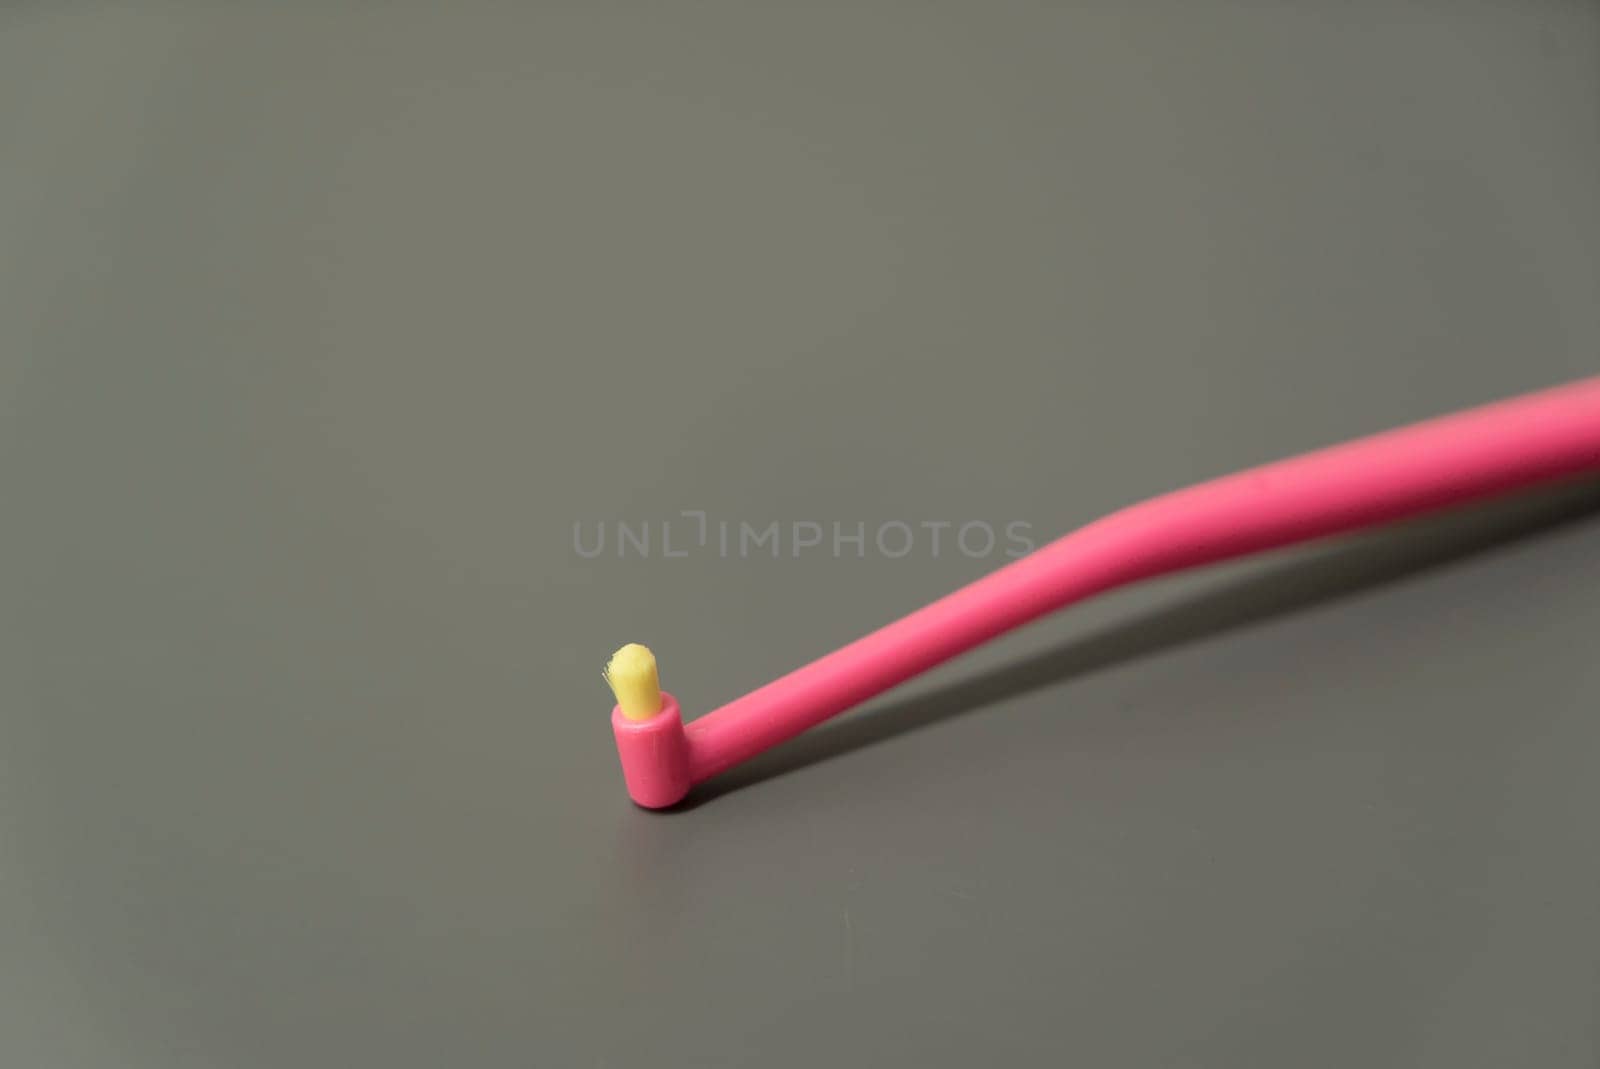 Plastic toothbrush on grey background. Blue and pink color brush. by lponline